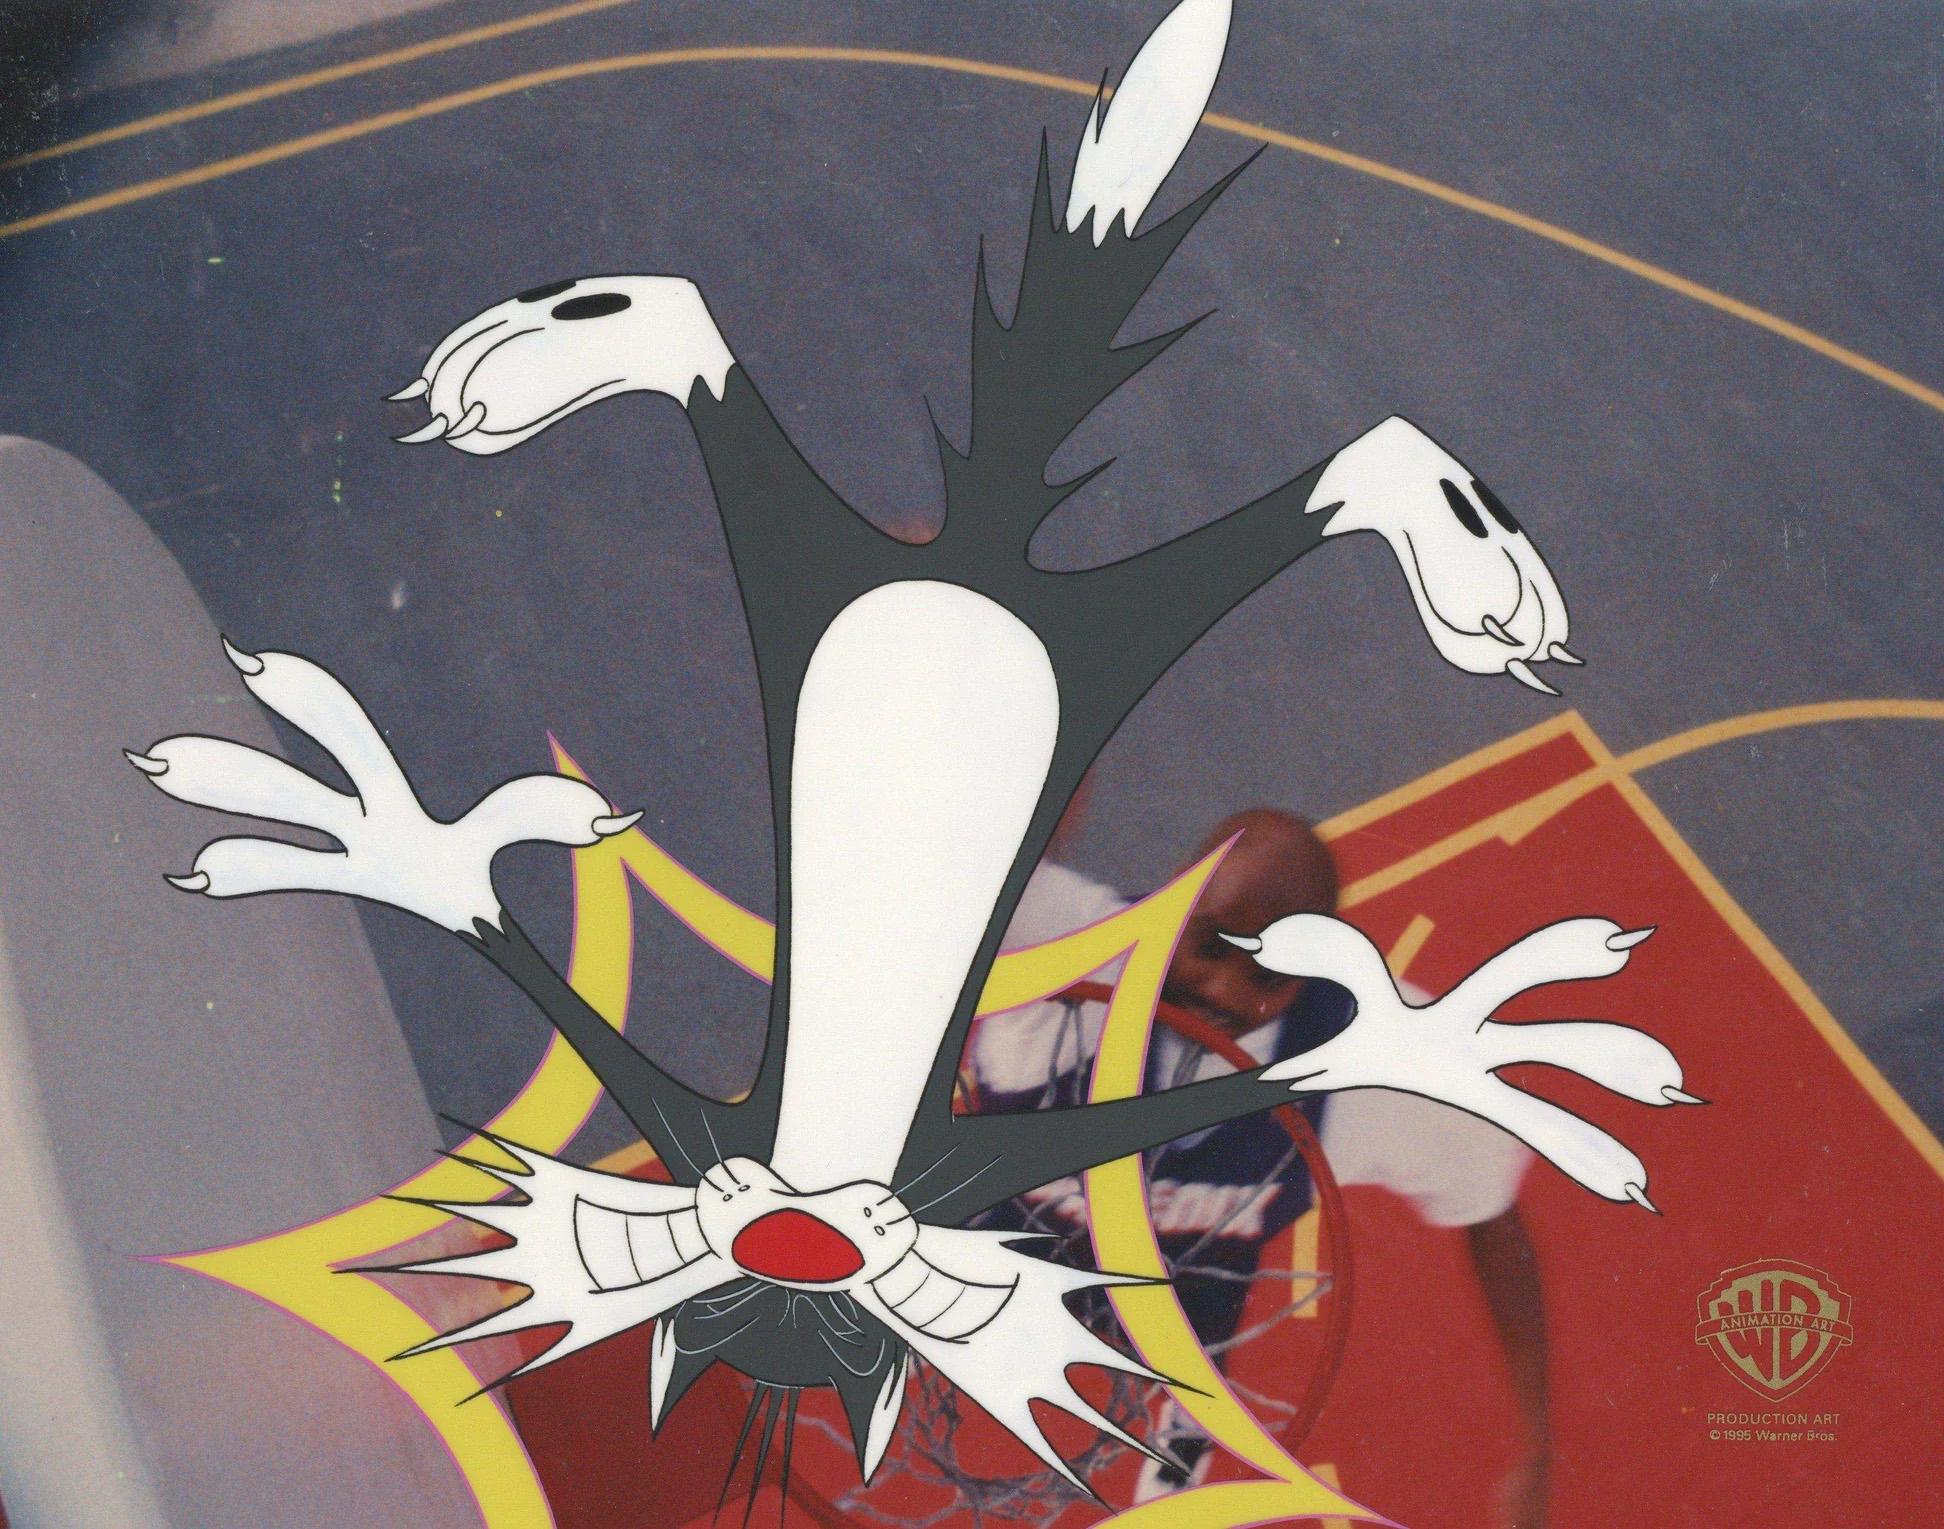 Looney Tunes Mcdonald's Commercial Original Cel: Sylvester and Charles Barkley - Art by Looney Tunes Studio Artists